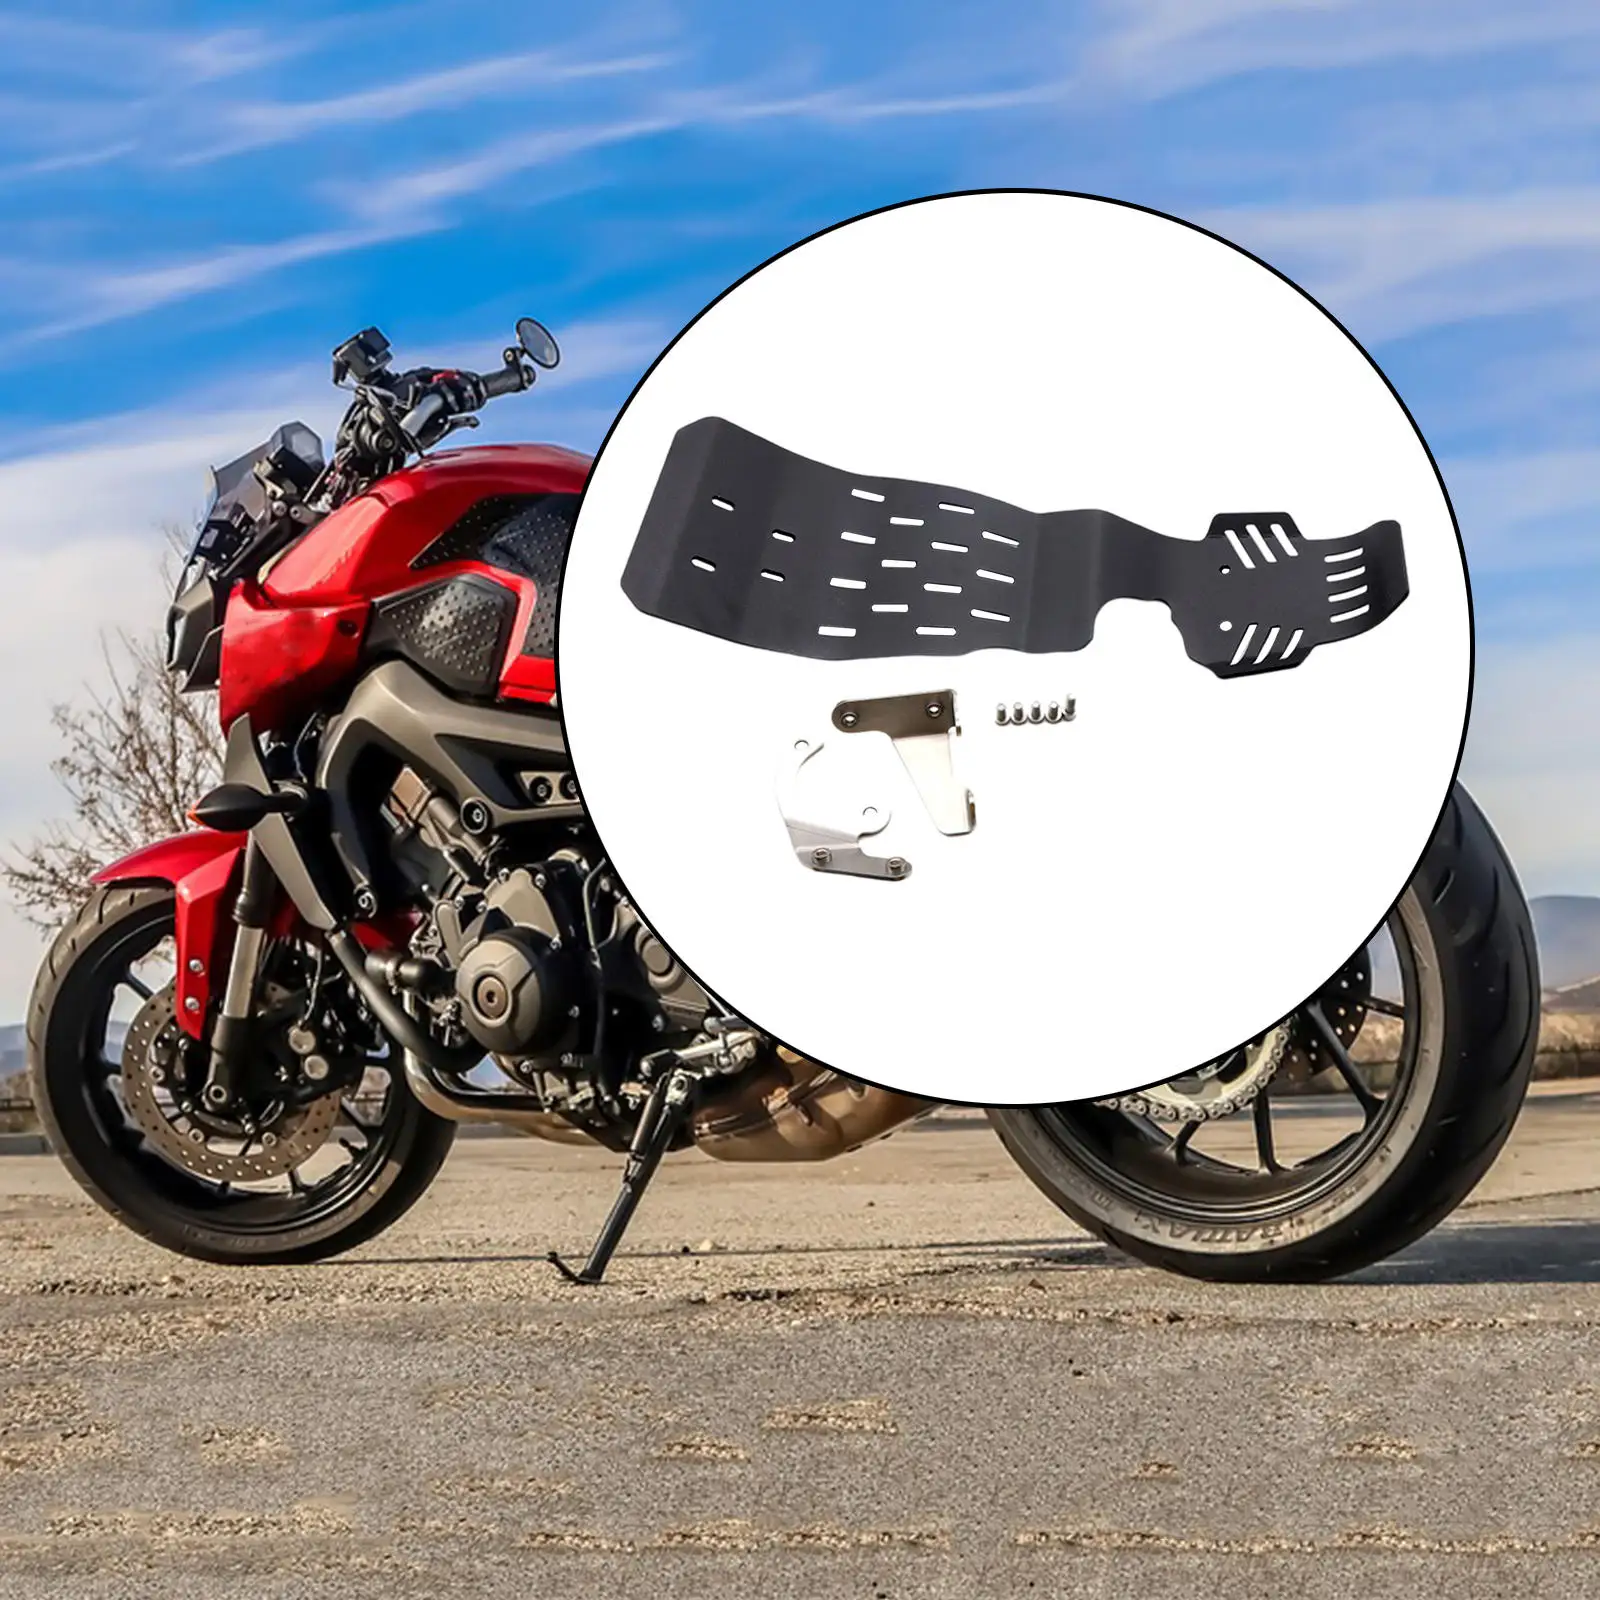 Engine Base Chassis Guard Cover Under Base Skid Plate Protector Fit for Ducati Scrambler 800 2015 2016 2017 2018 2019 2020 2021